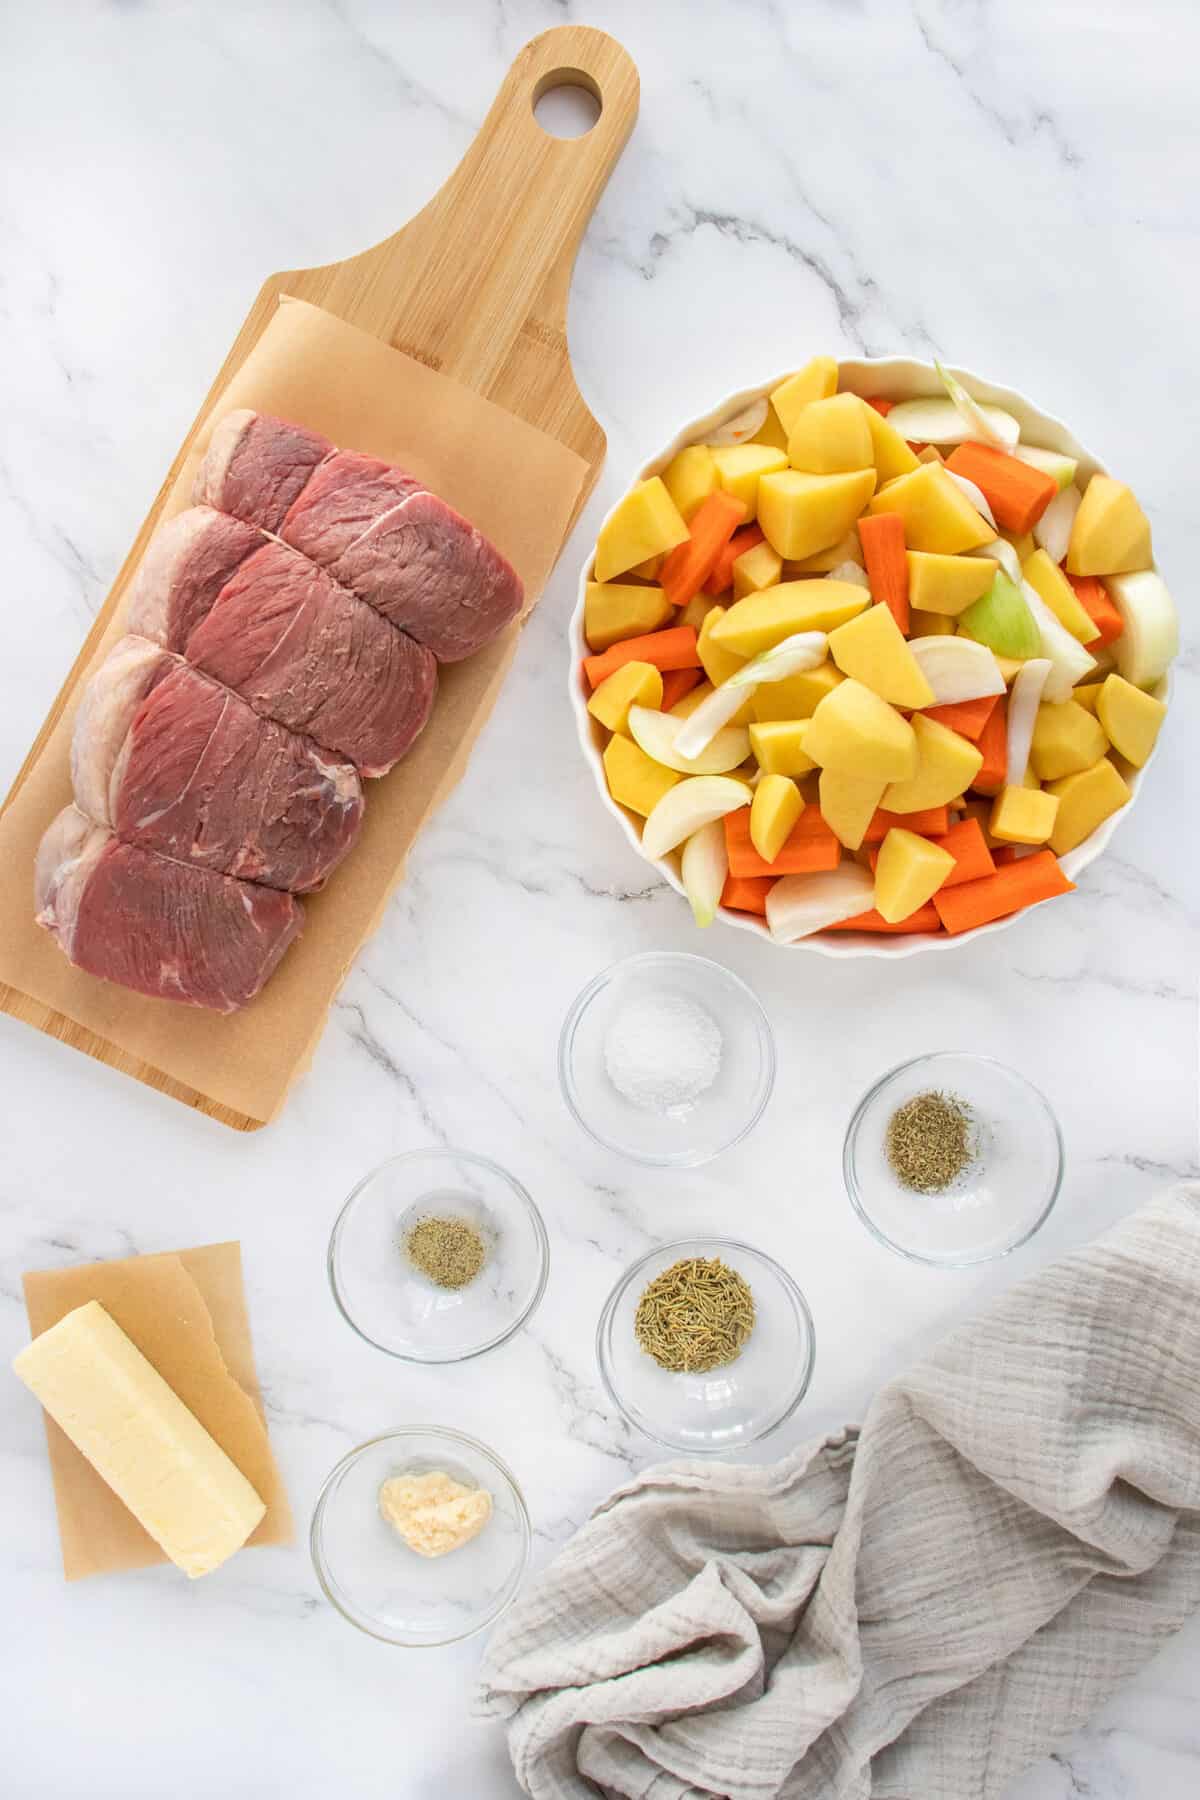 ingredients for cooking a sirloin roast